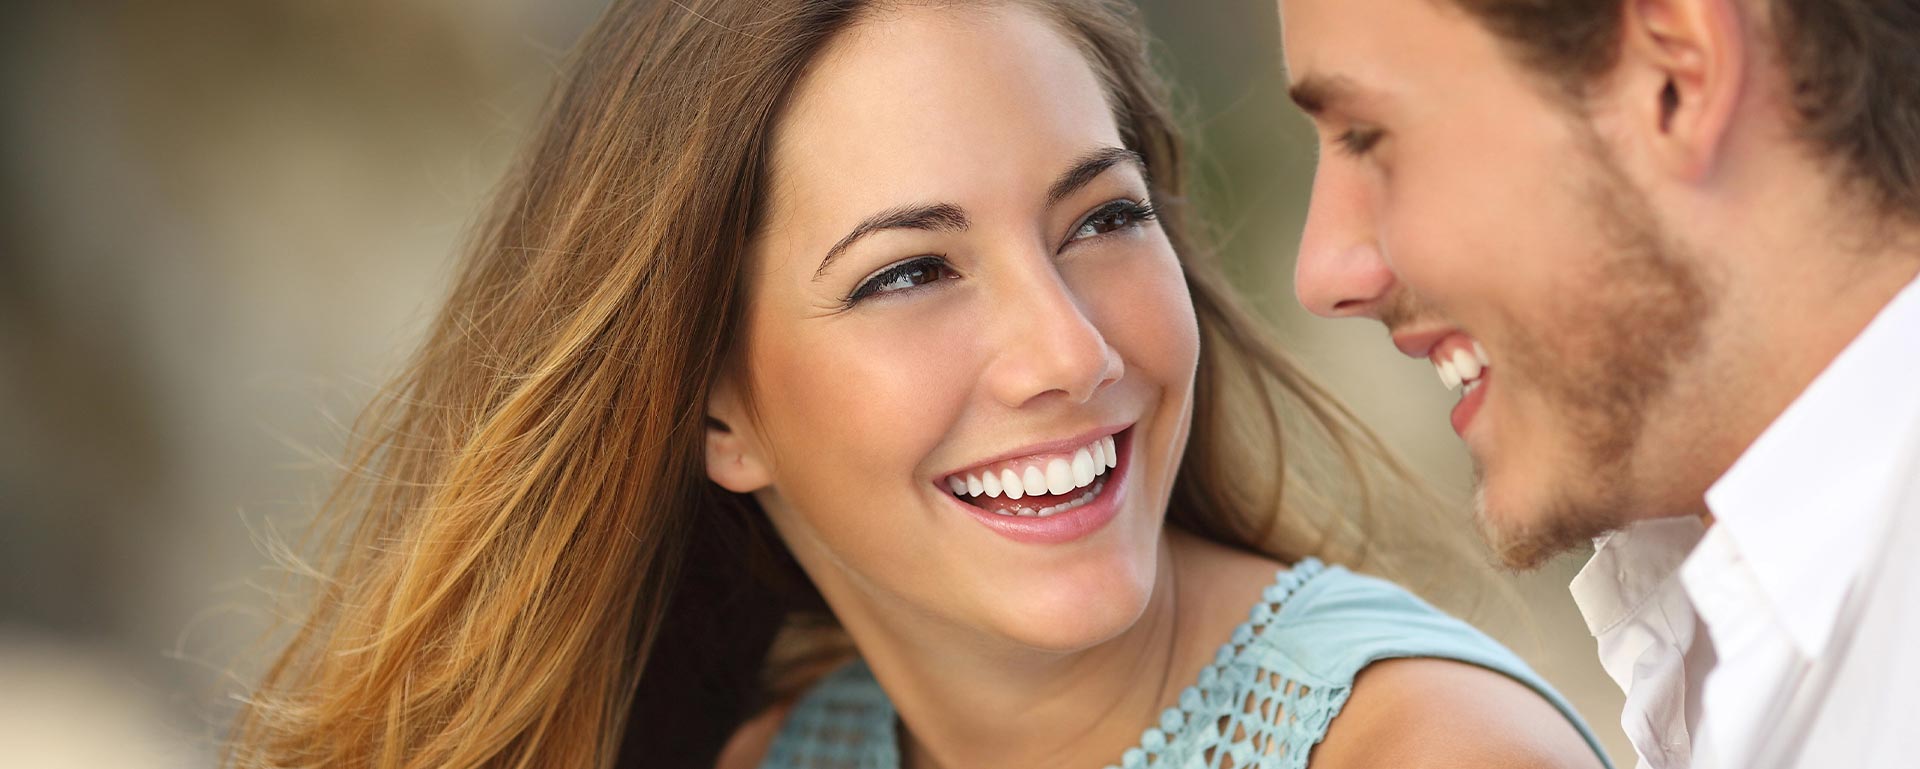 Couple laughing with a white perfect smile